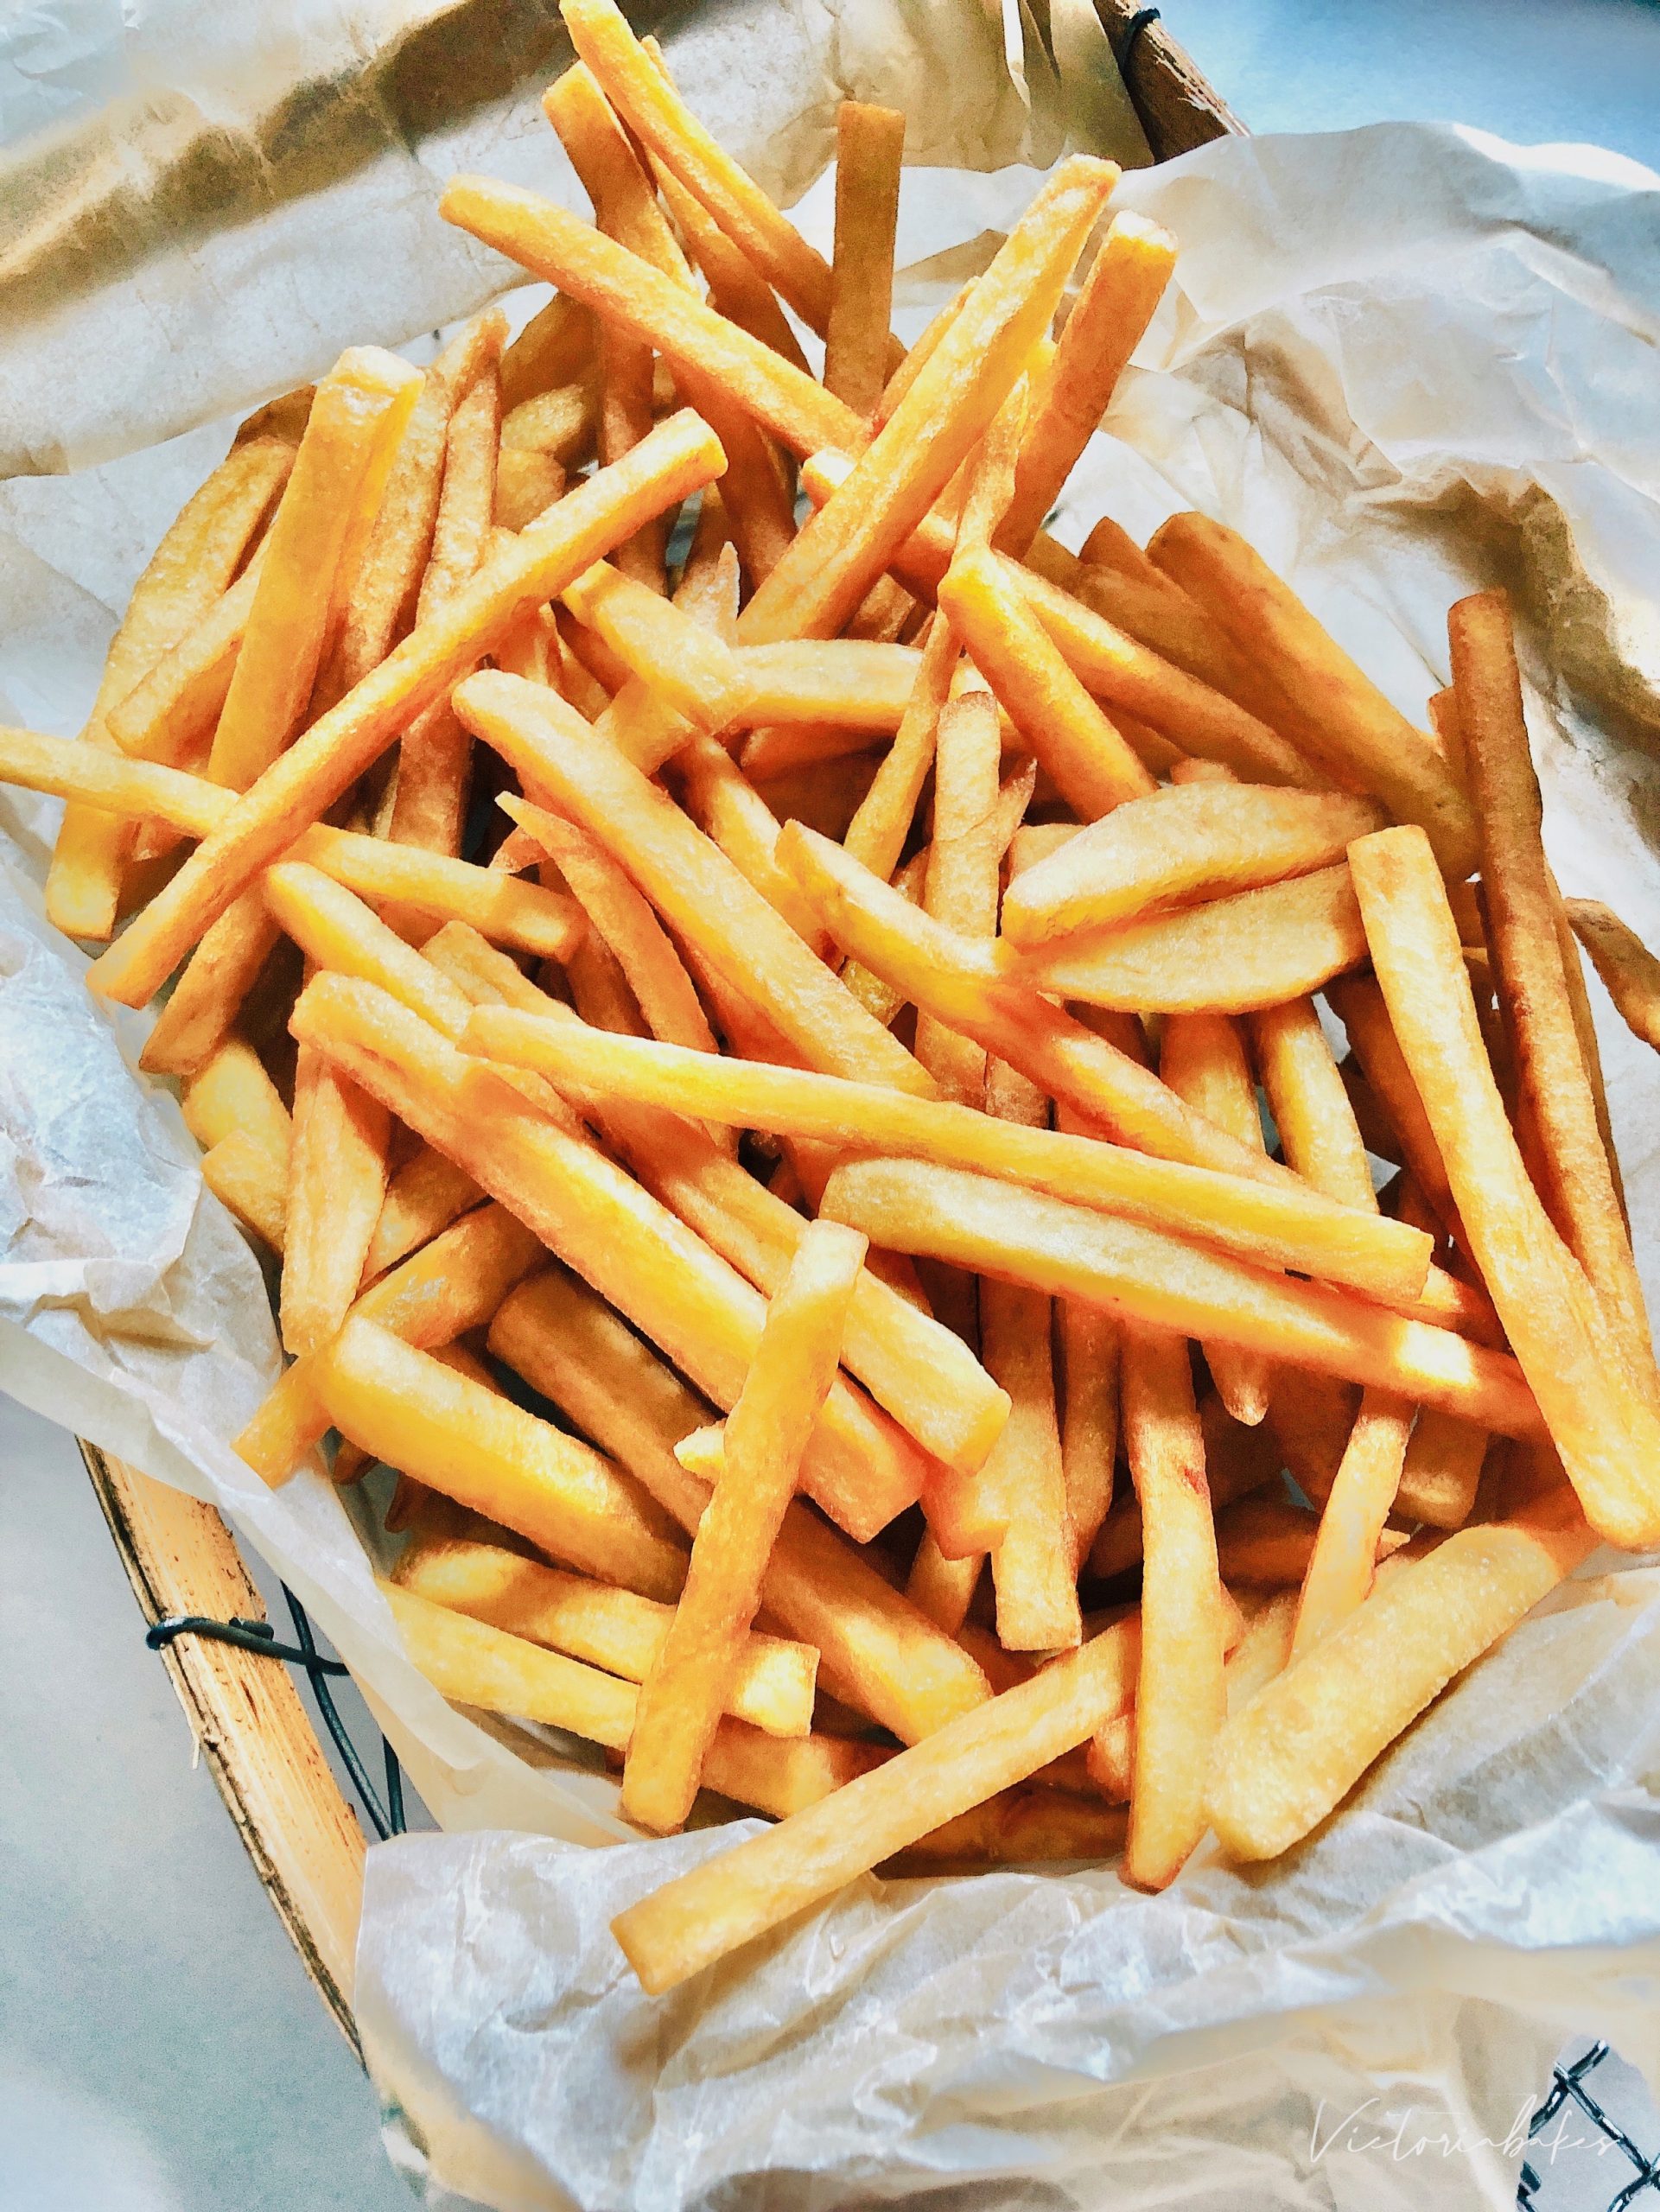 homemade crispy french fries ~ highly recommended 自制脆脆薯条～强推